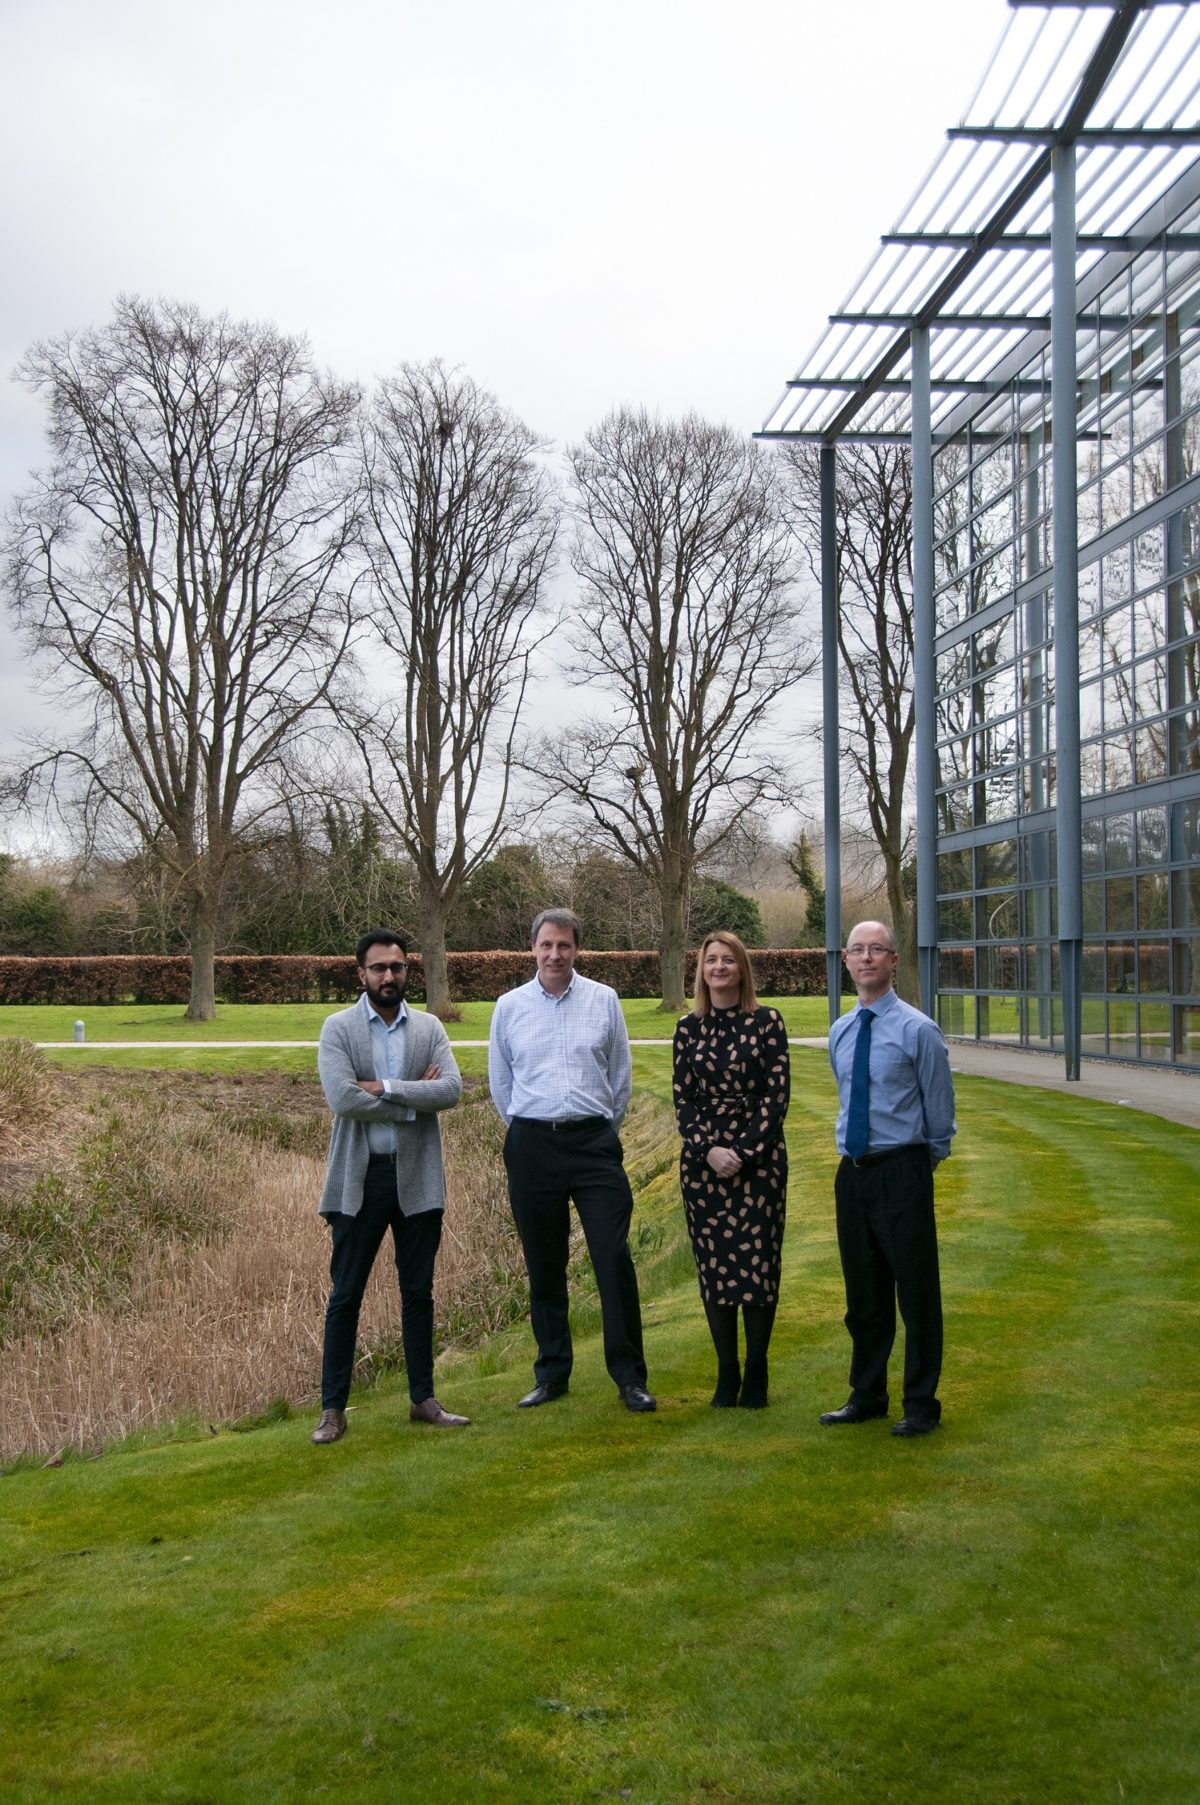 (From left) Rajan Sanhotra (EMEA Marketing Manager), Jason Humm (VP Innovation Development), Clare Bull (VP People & Culture) and Andrew Walker (Regional Sales Manager) of Innovyze, whose Head Office is based at Howbery Business Park.